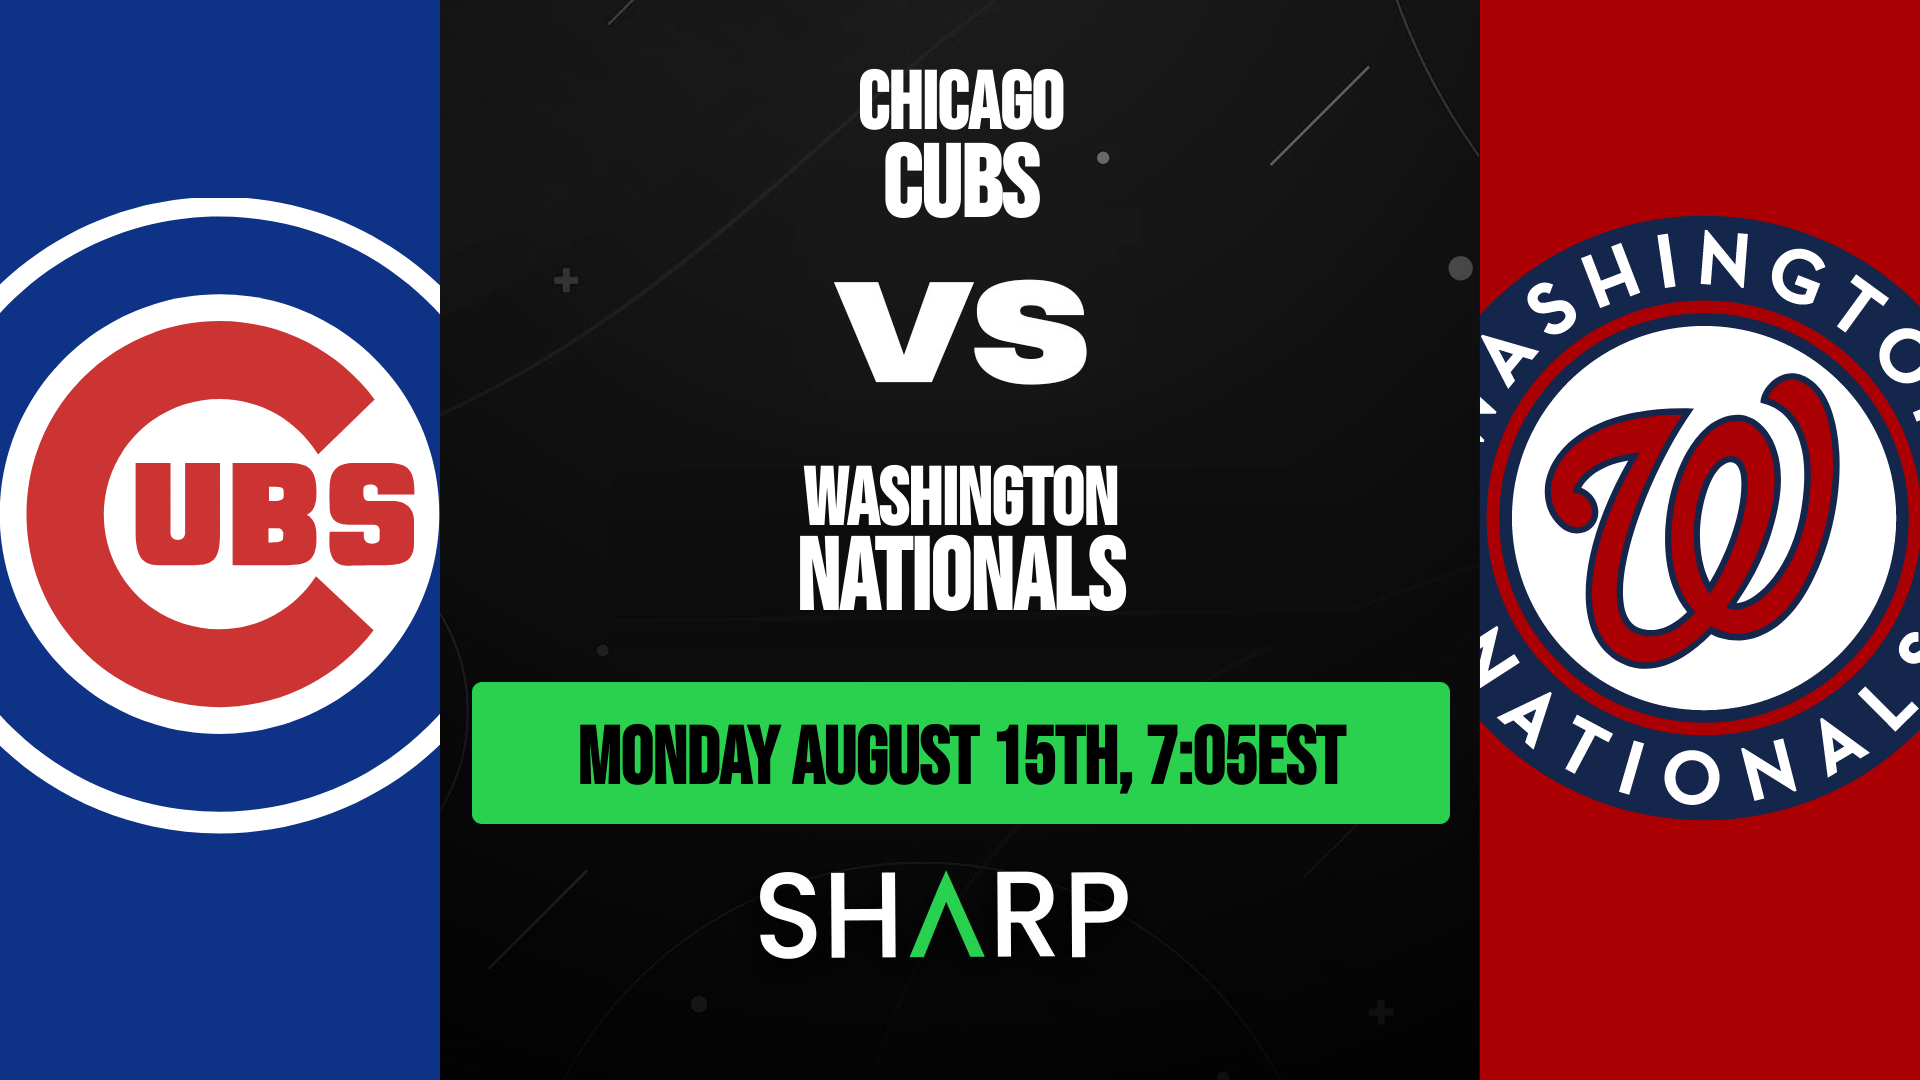 Chicago Cubs @ Washington Nationals Matchup Preview - August 15th, 2022